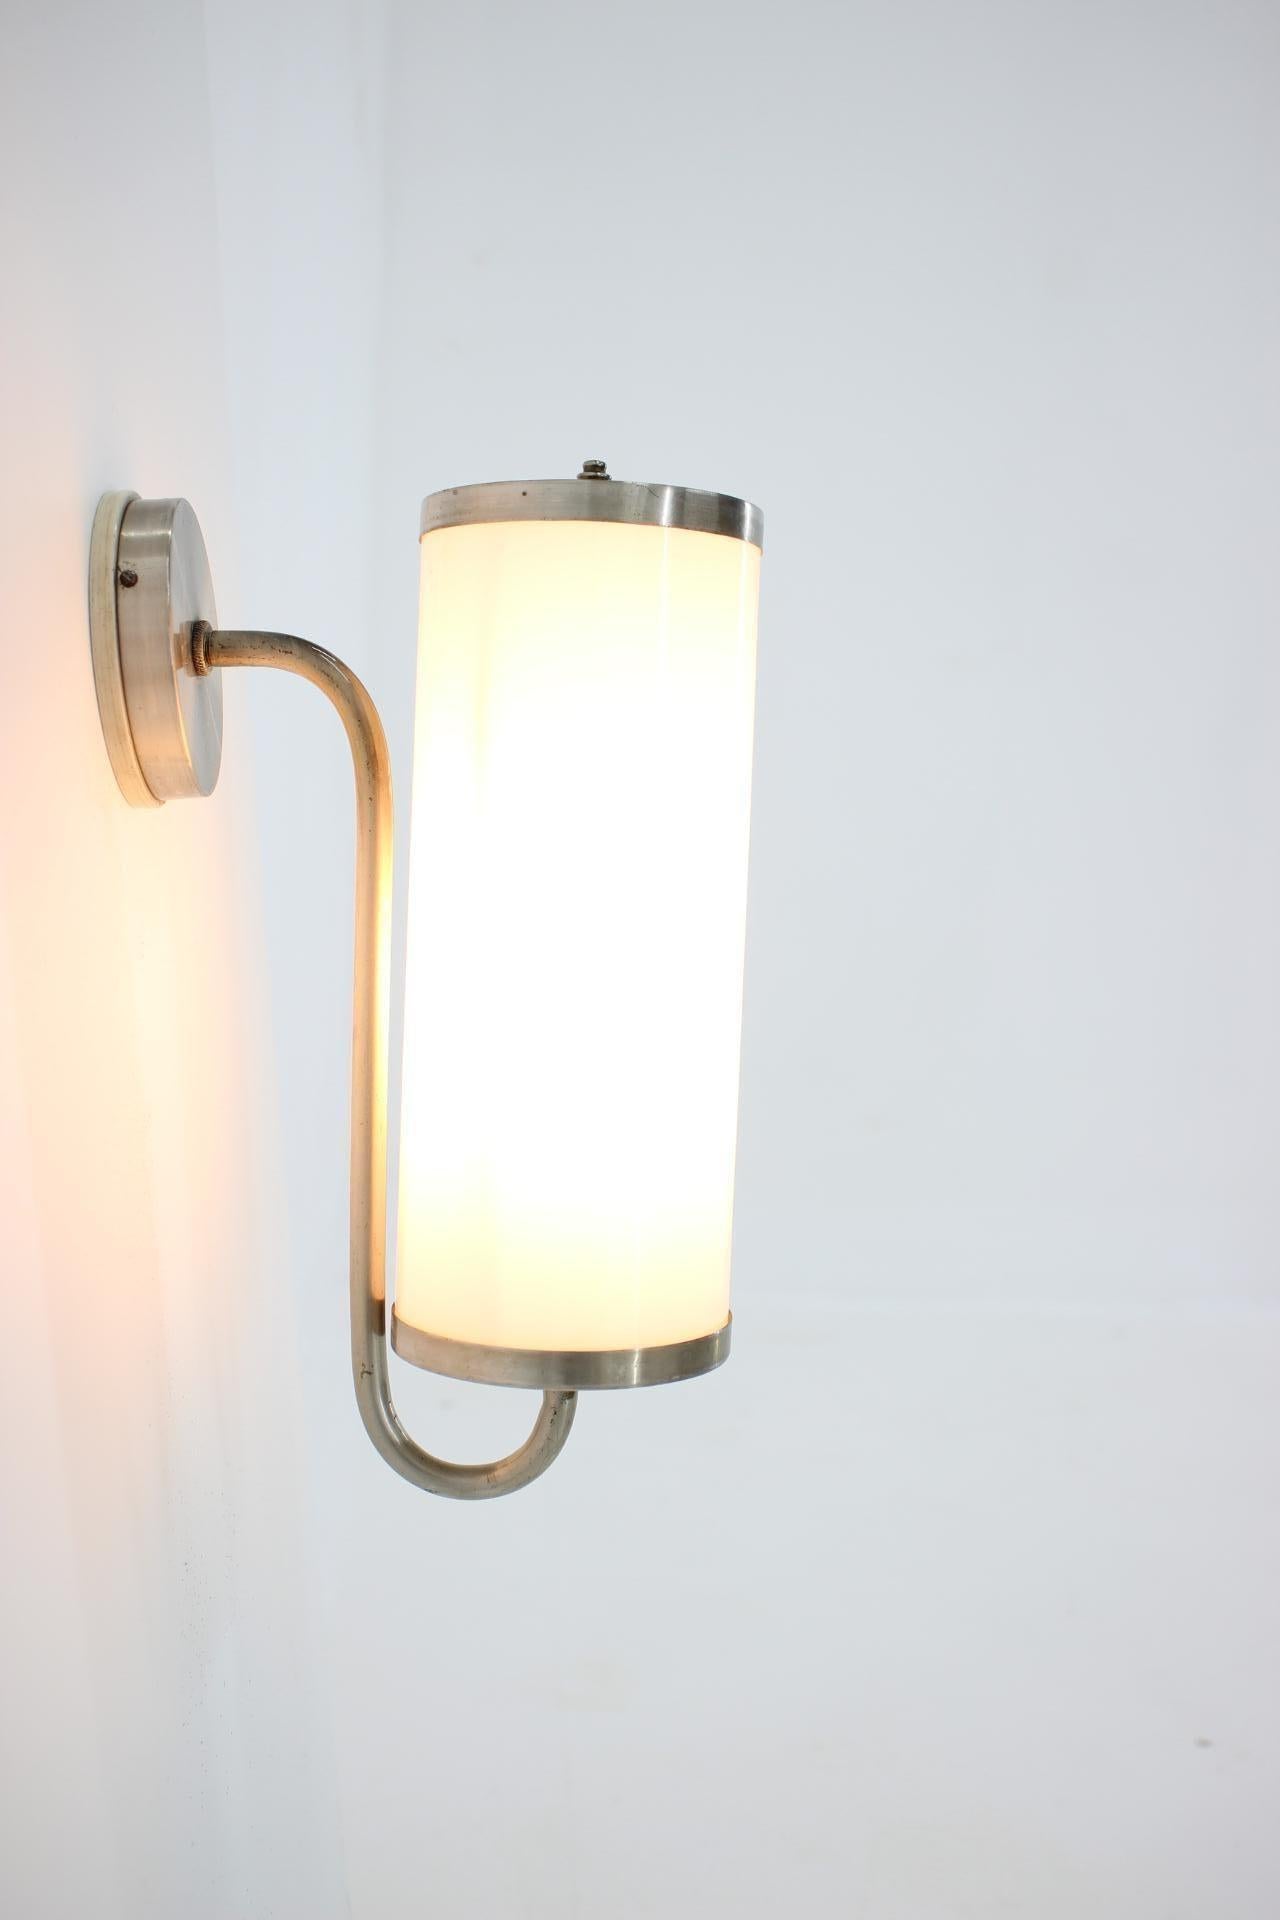 Bauhaus Chrome Wall Lamp/Scone, 1930s In Good Condition For Sale In Praha, CZ